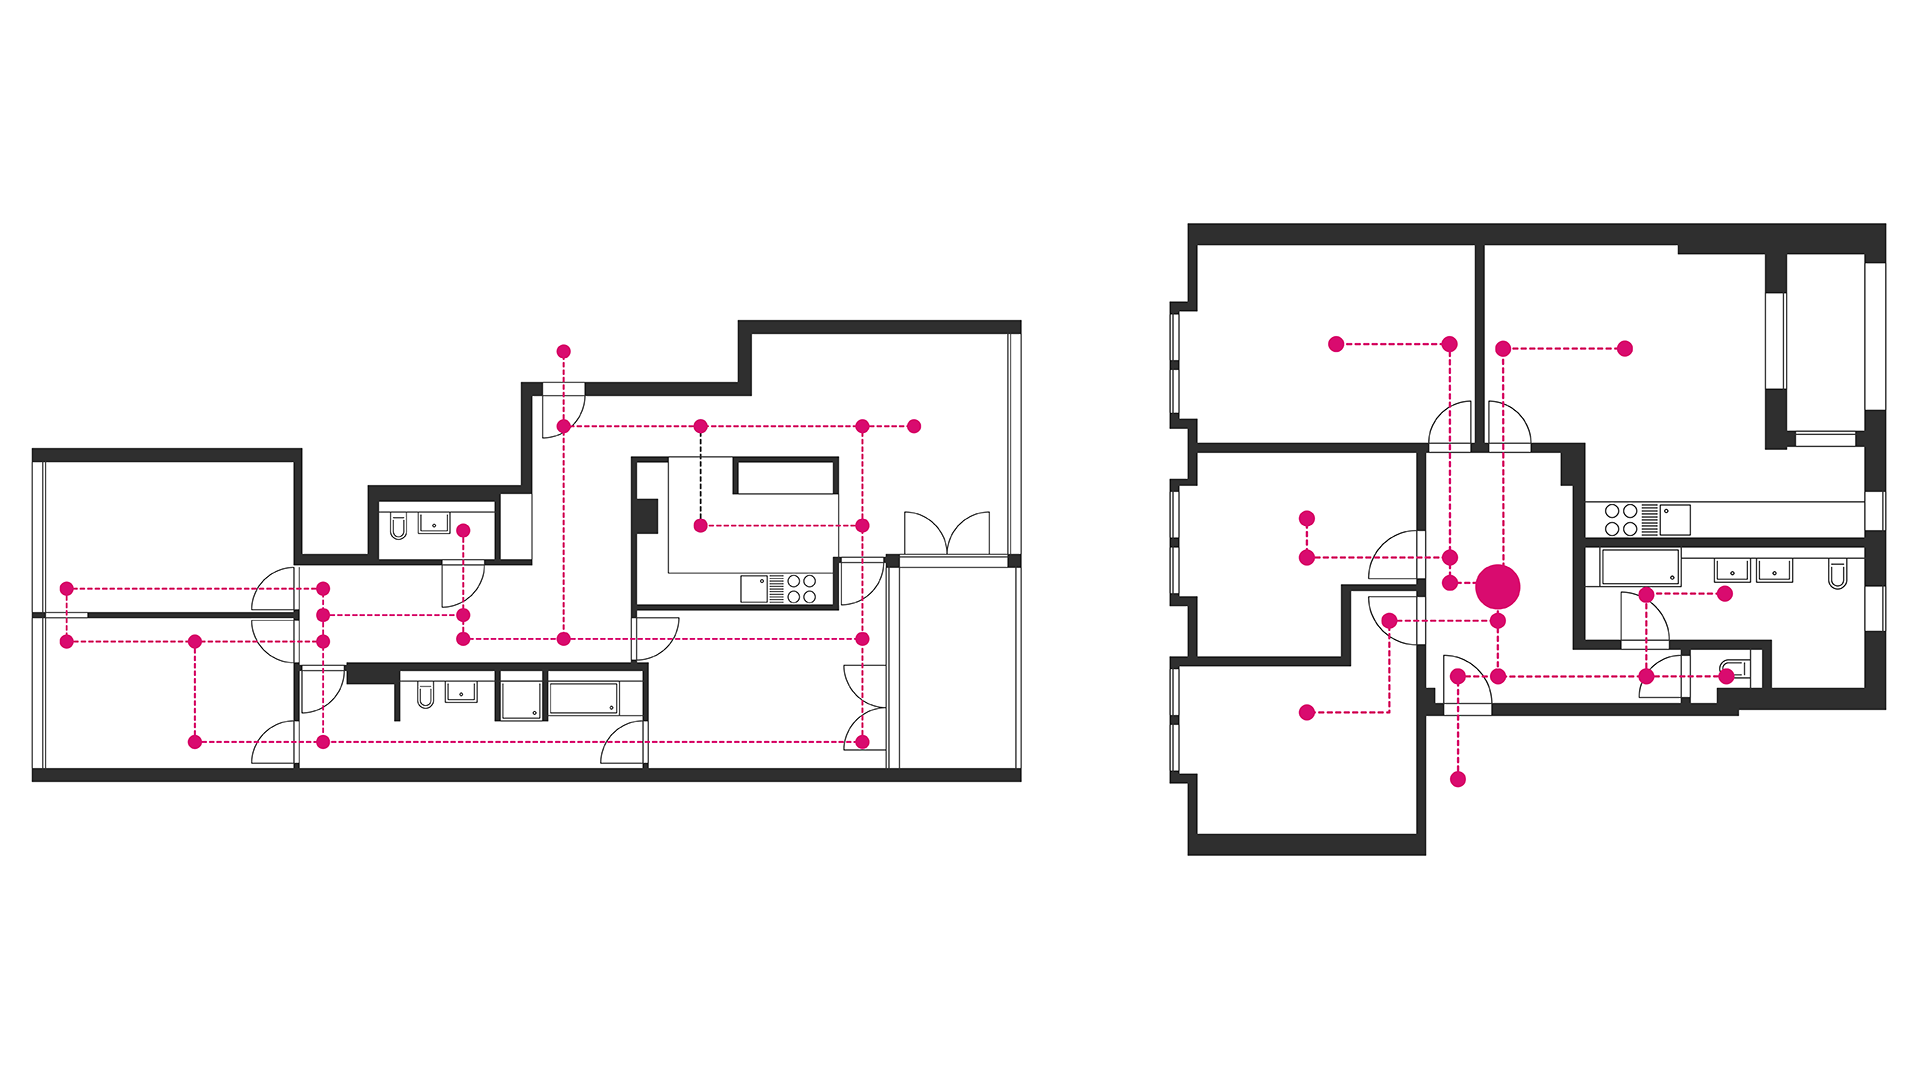 Connectivity determines the quality of the floor plan 